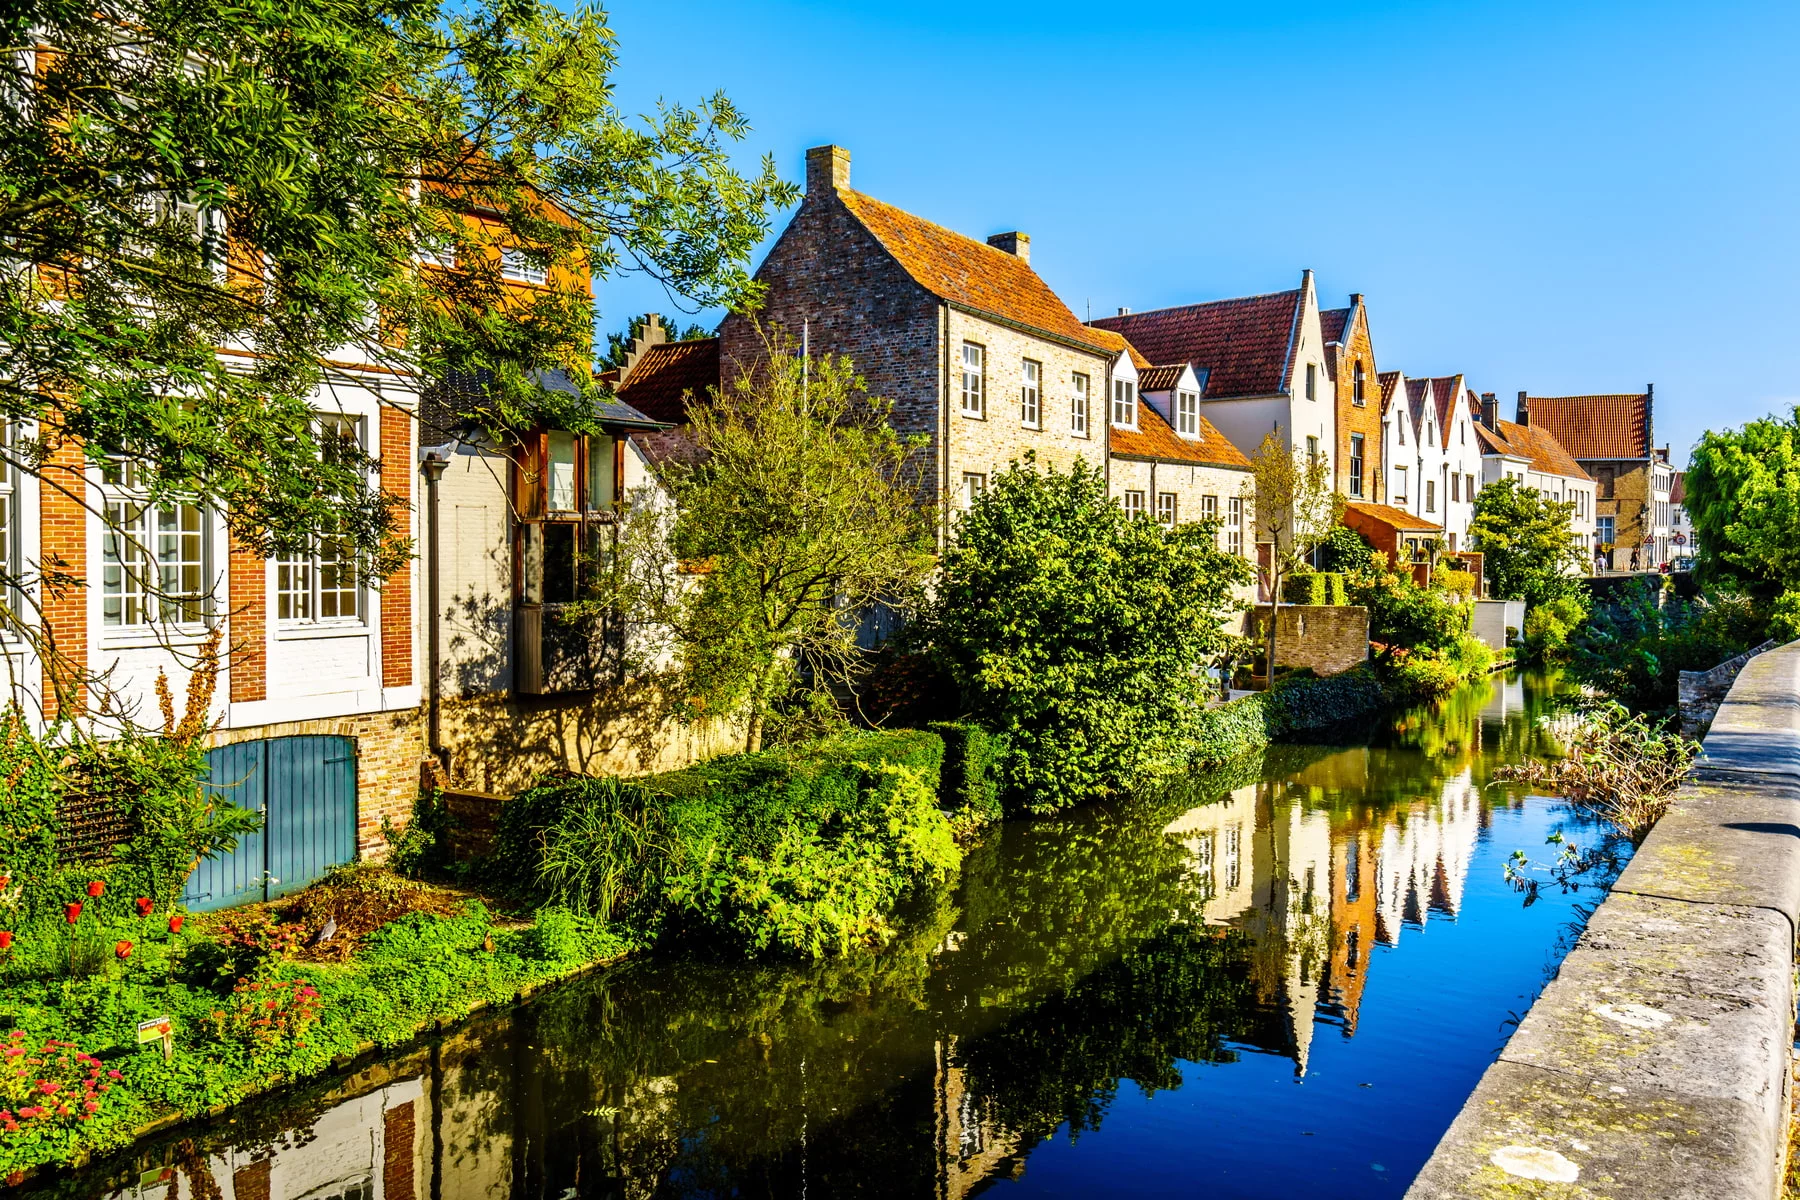 houses with small backyard gardens along a canal in Bruges